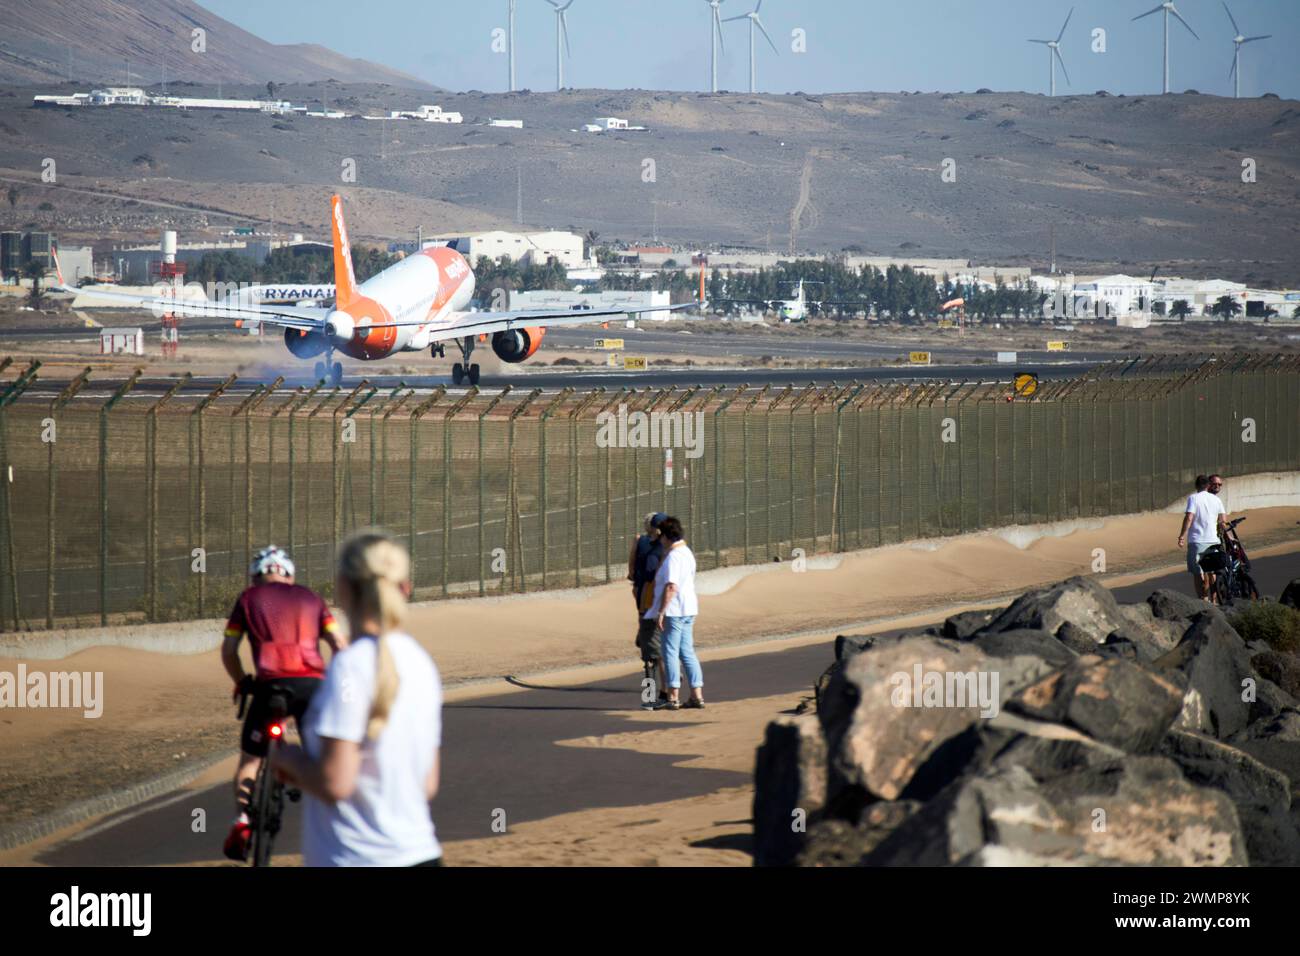 tourists watch easyjet airbus a320 aircraft g-uzhh touching down at ace arrecife airport Lanzarote, Canary Islands, spain Stock Photo